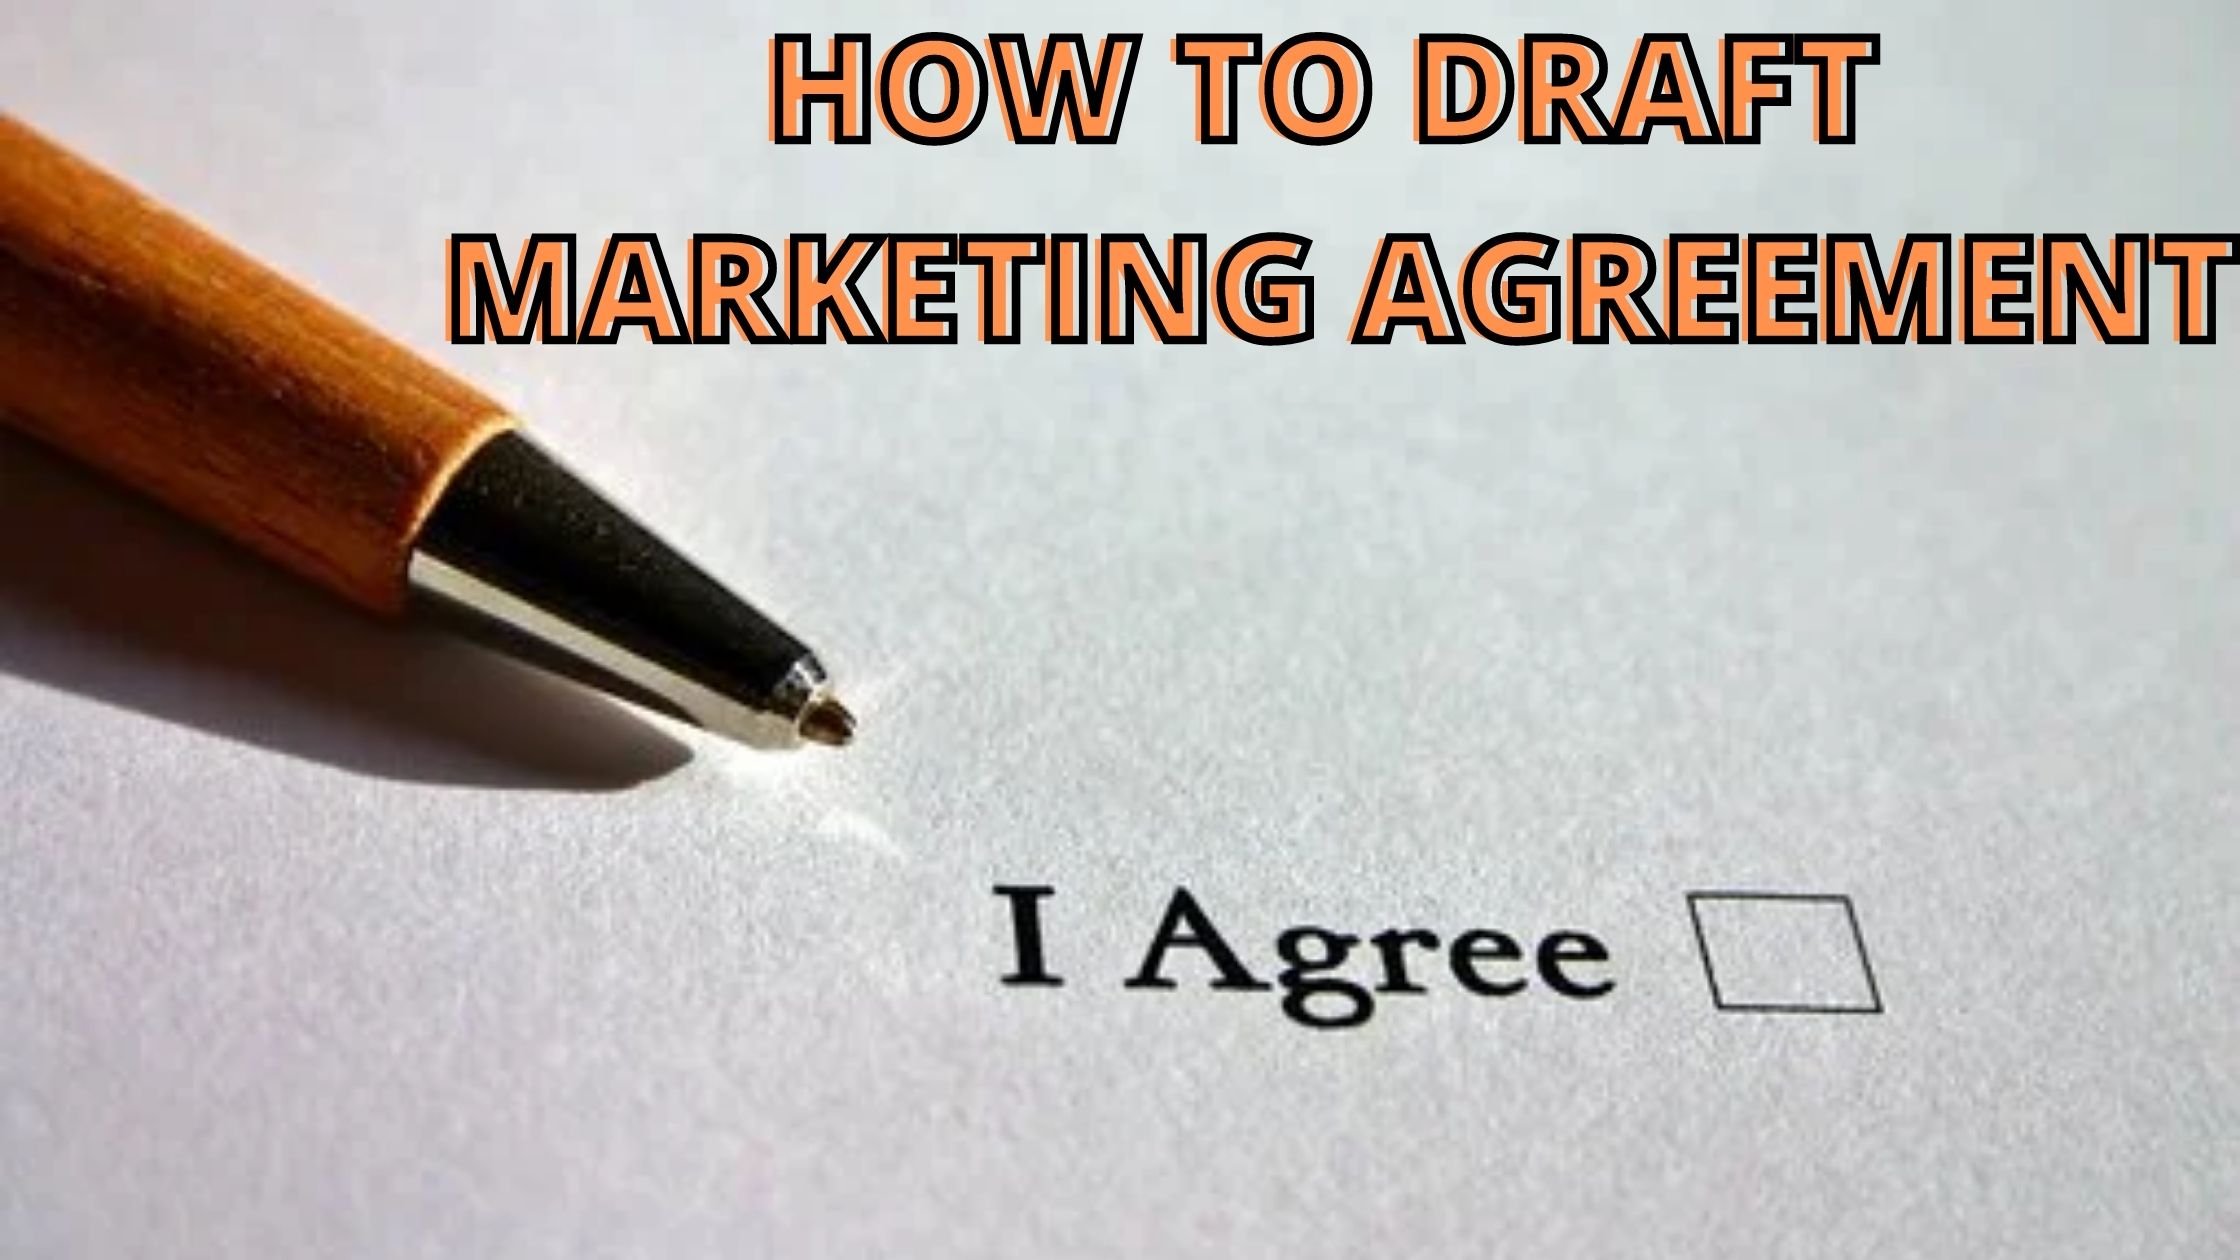 HOW TO DRAFT A MARKETING AGREEMENT?